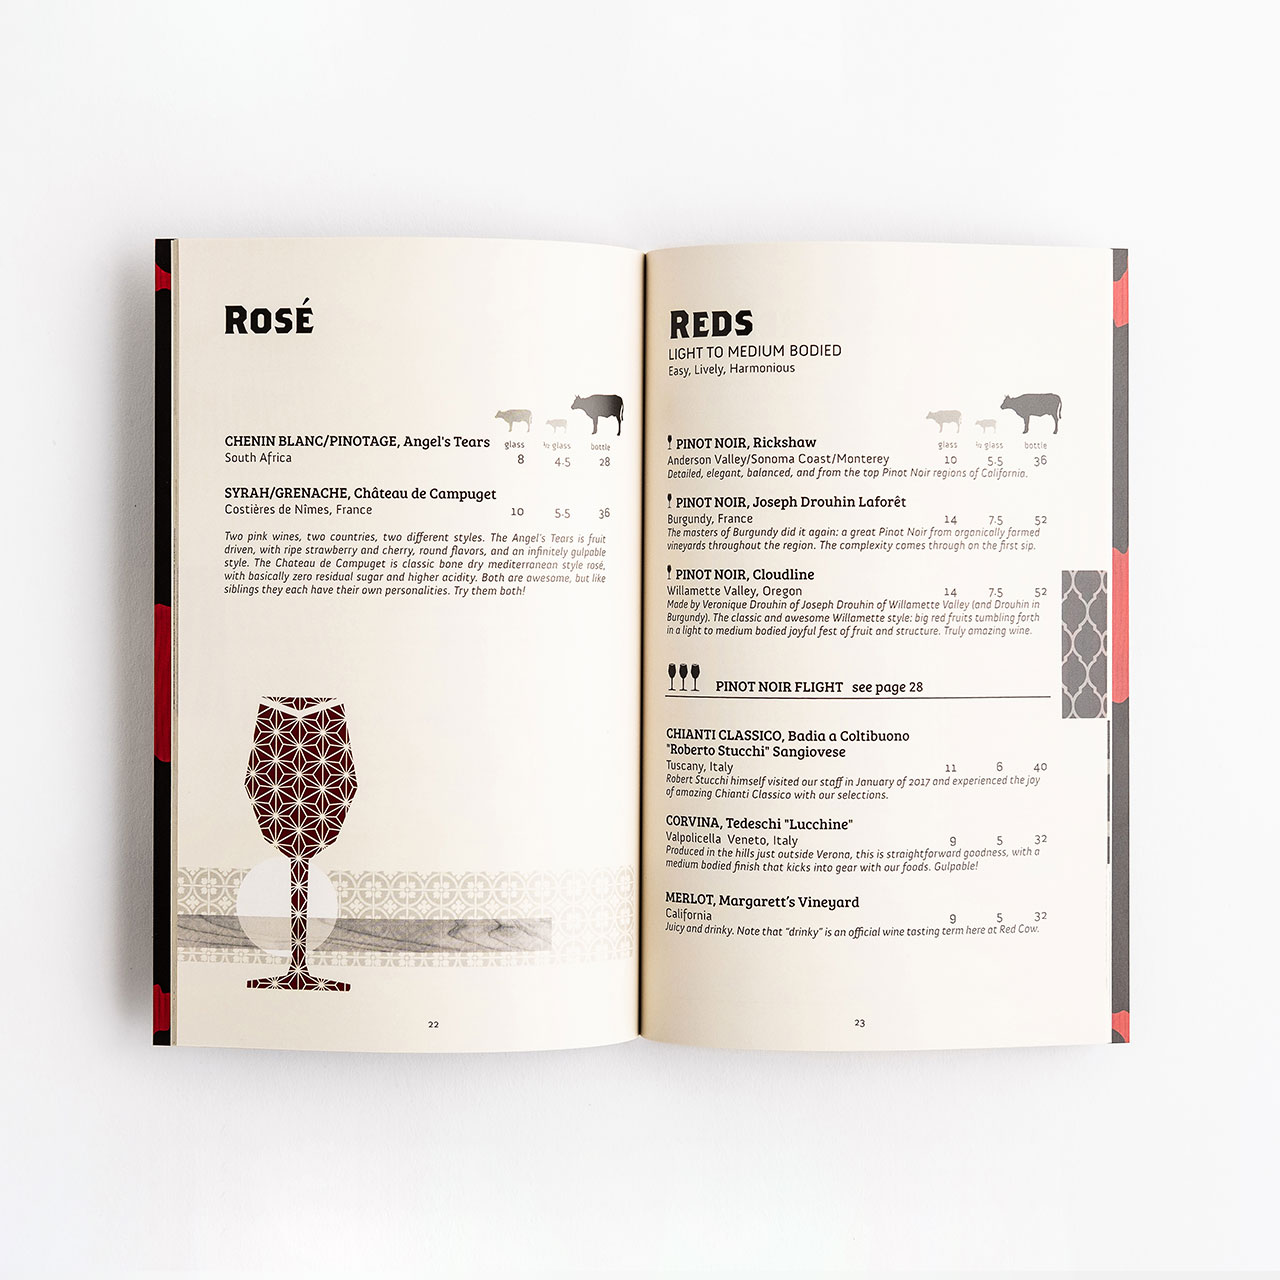 A custom drink menu printed with wine offerings and details.